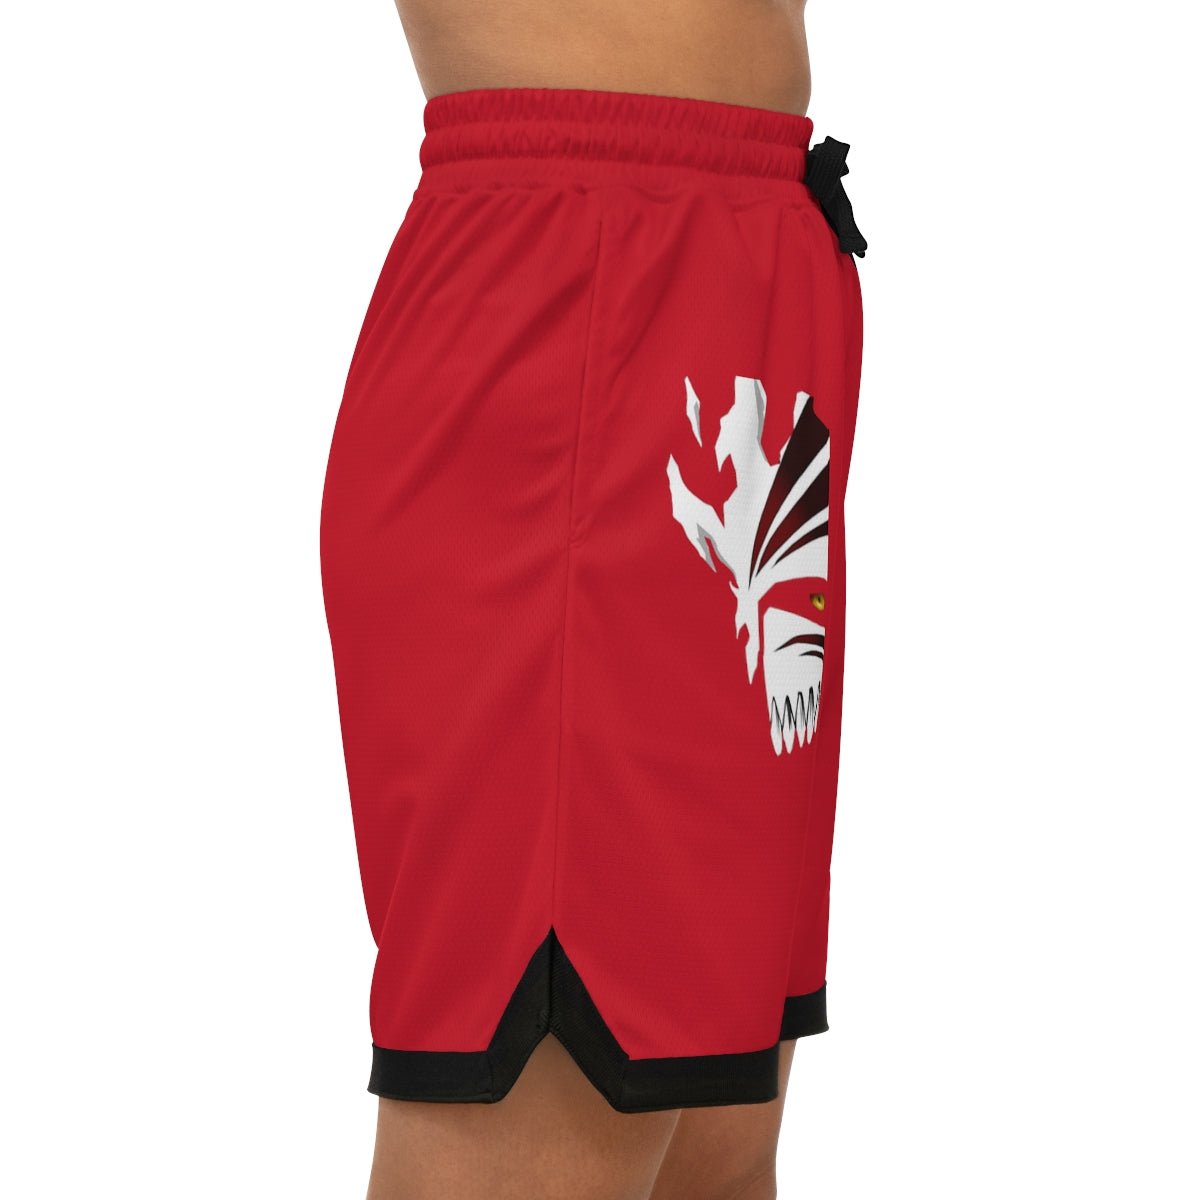 Ichigo's Hollow Mask Bleach Anime Athletic Shorts w/Pockets - One Punch Fits